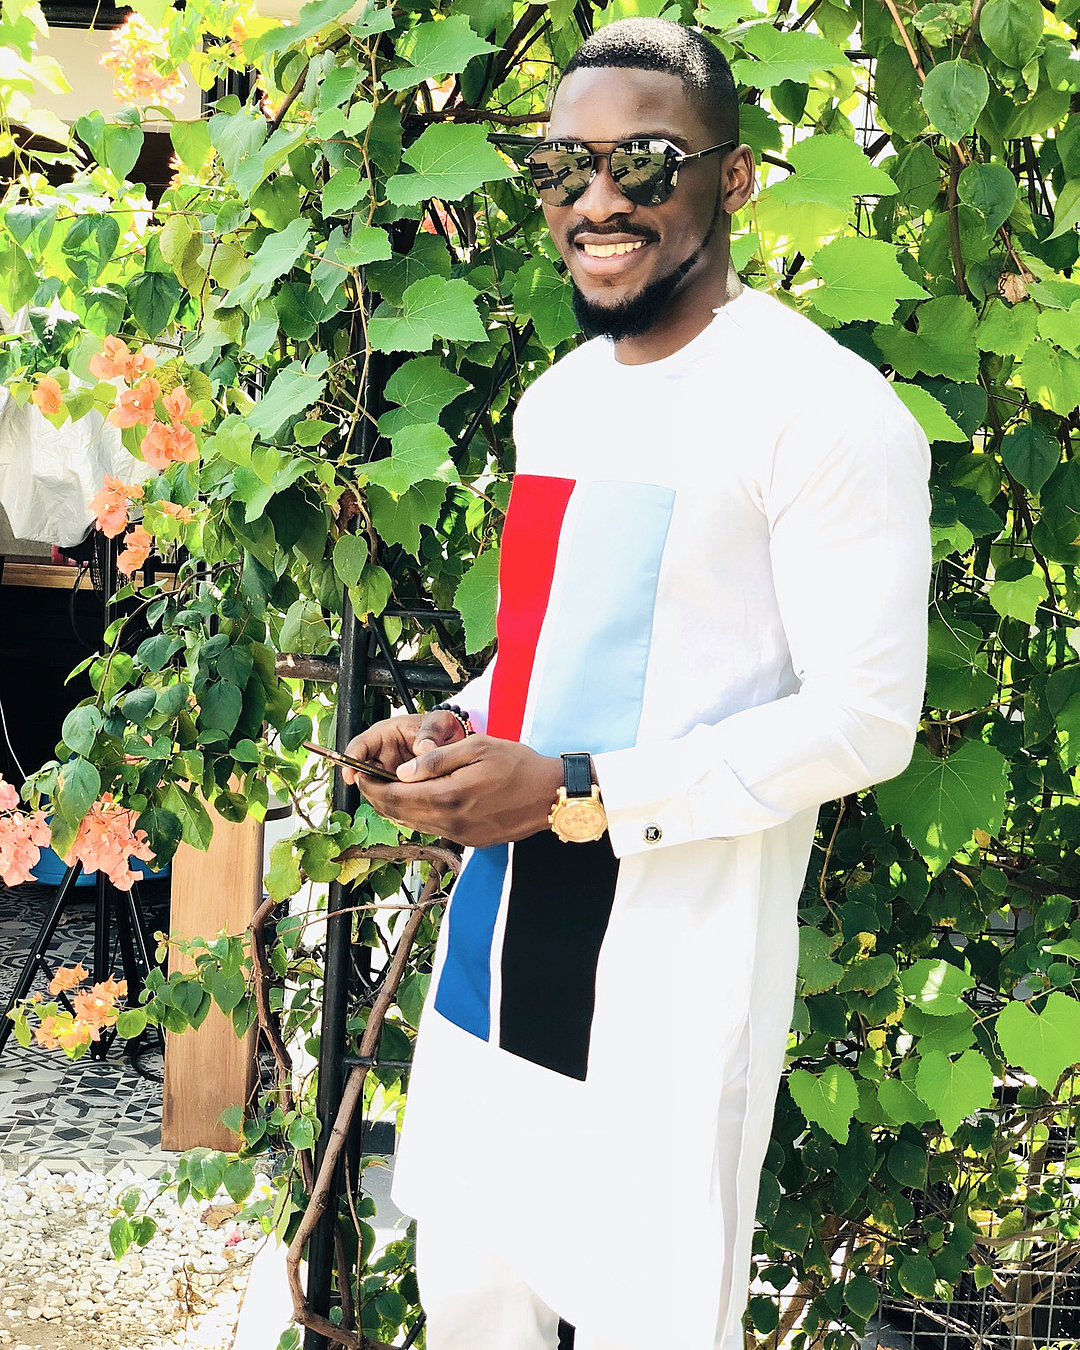 Alex & Tobi step out in style as they rock matching outfit. (Photos)